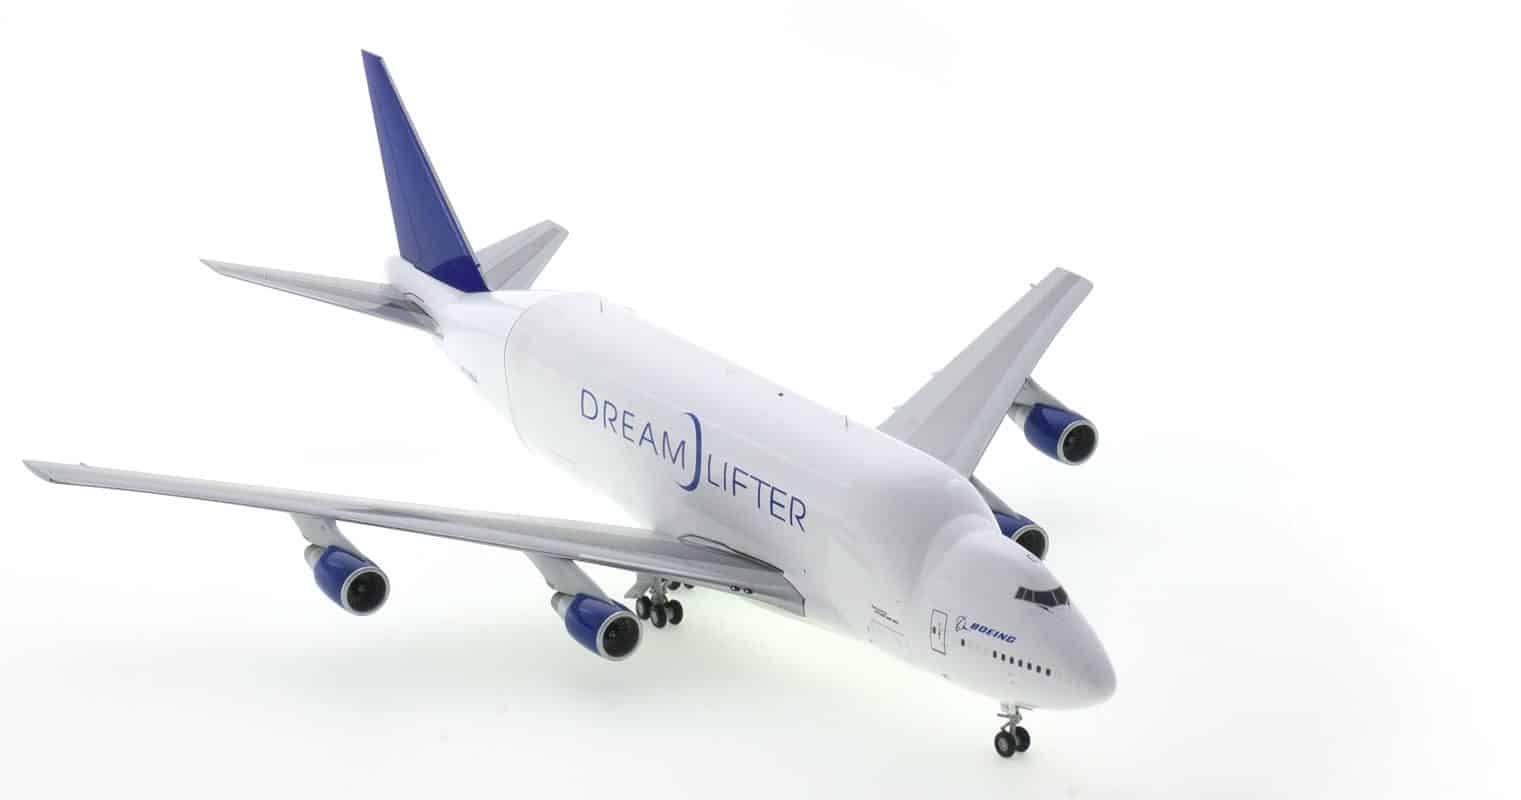 Front starboard side view of Gemini Jets G2BOE1003 - 1/200 scale diecast model of the Boeing 747-47LCF Dreamlifter with opening fuselage, registration N718BA, in Boeing livery